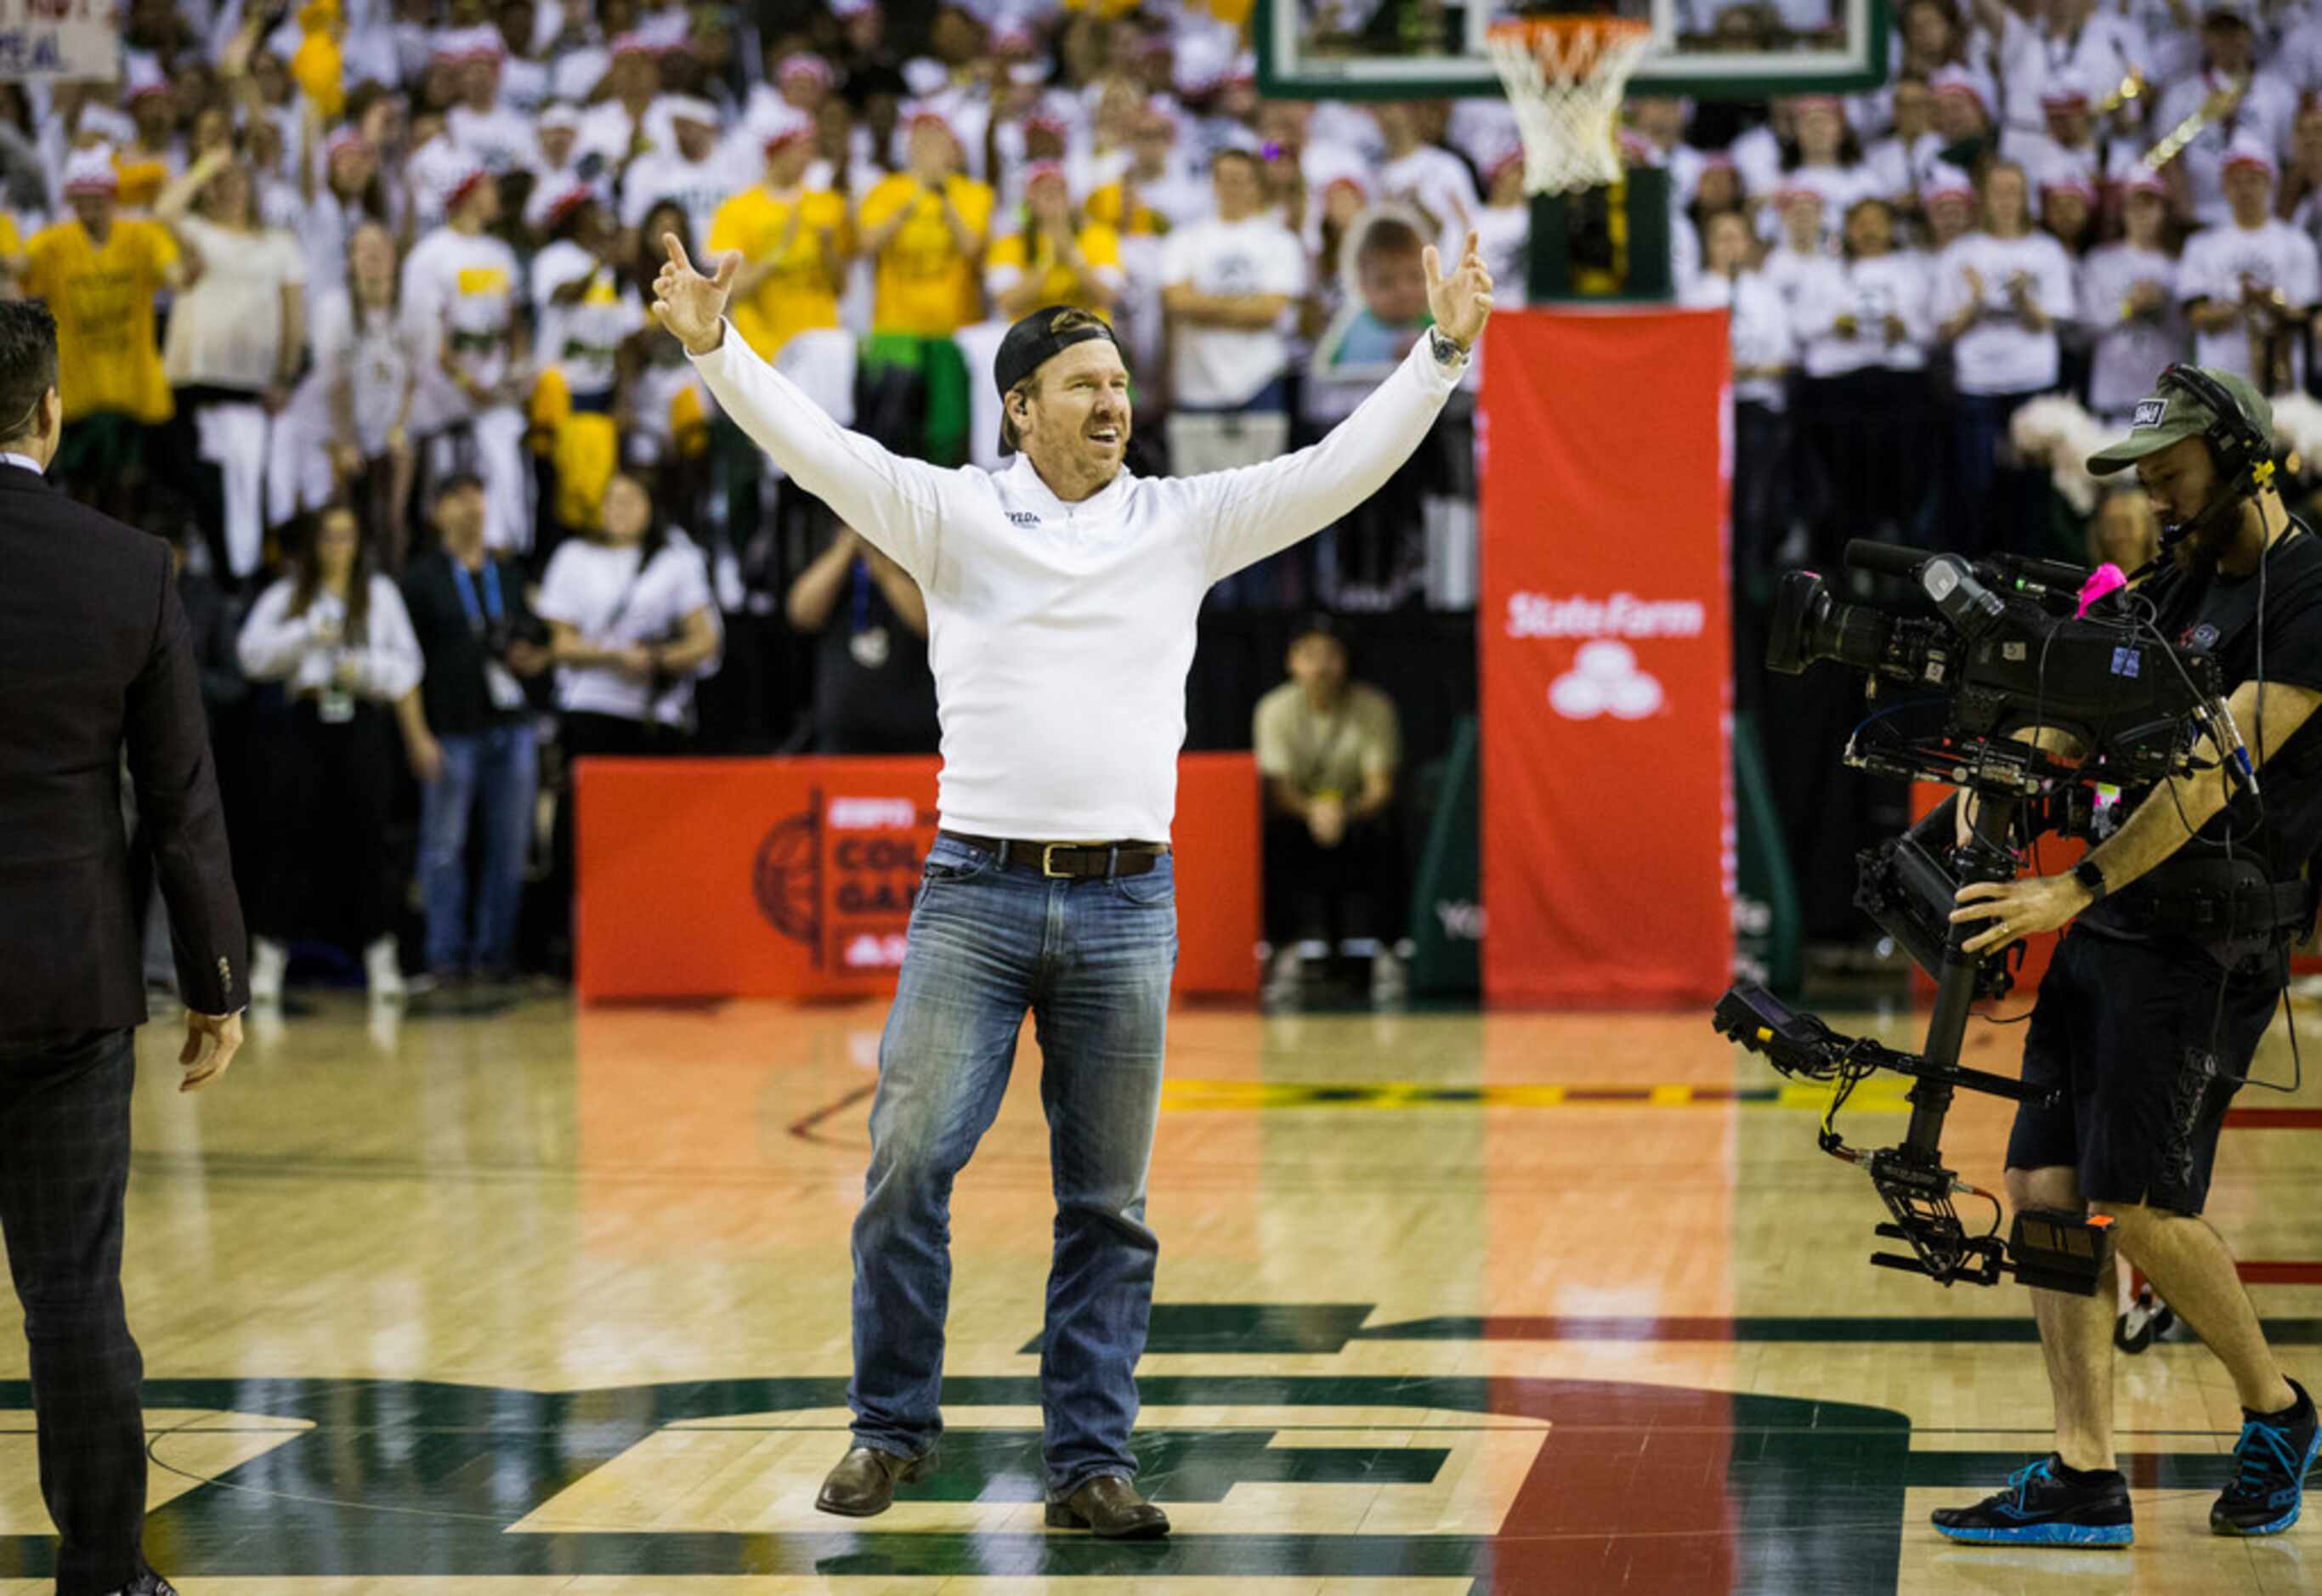 Fixer Upper's Chip Gaines cheers on the court before an NCAA men's basketball game between...